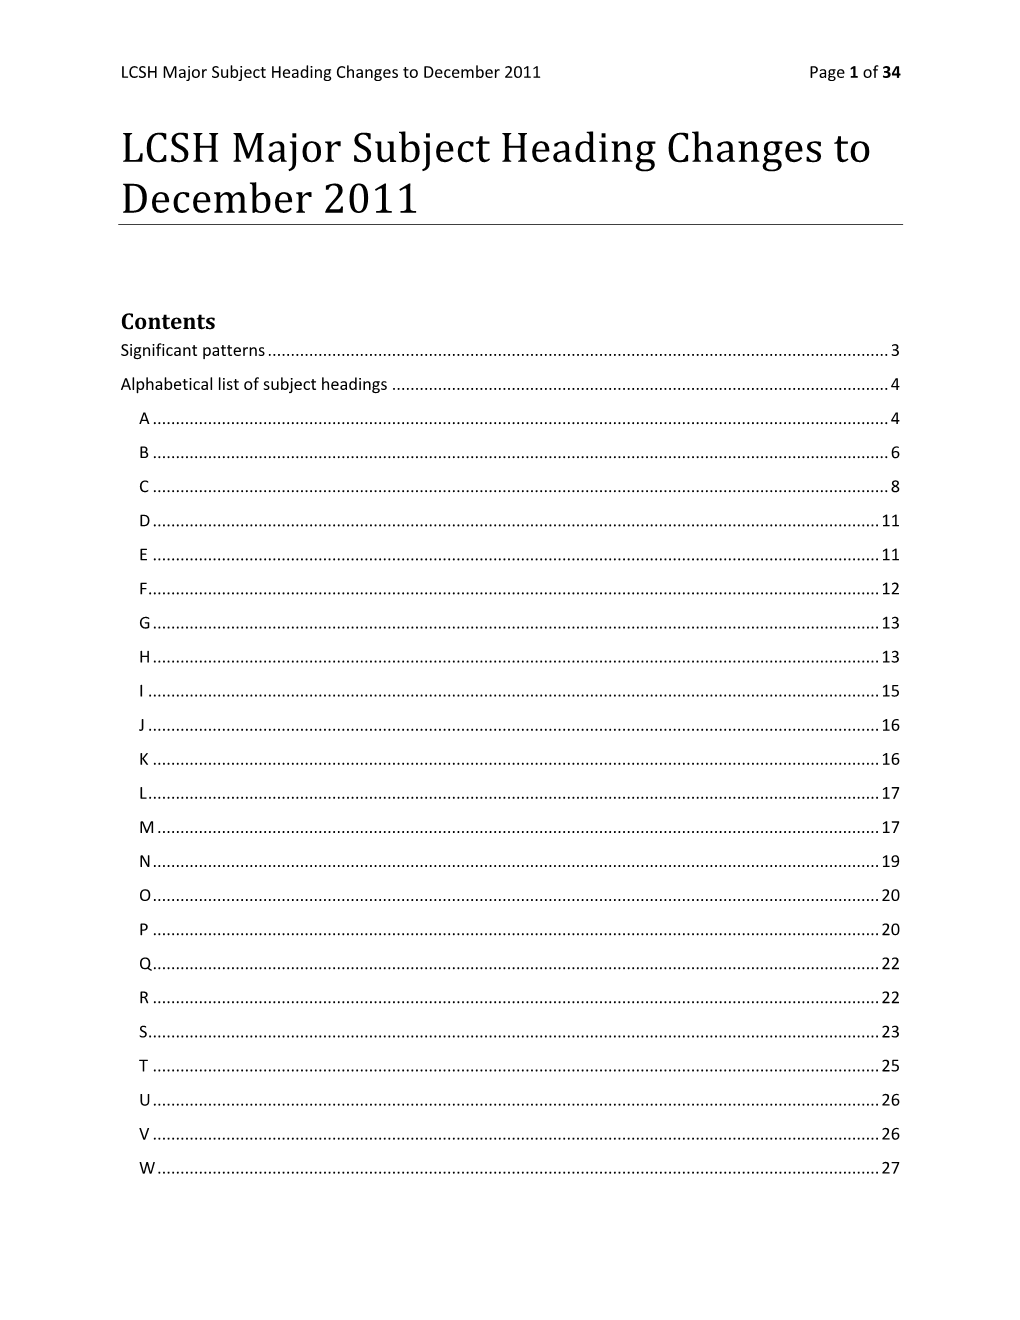 LCSH Major Subject Heading Changes to December 2011 Page 1 of 34